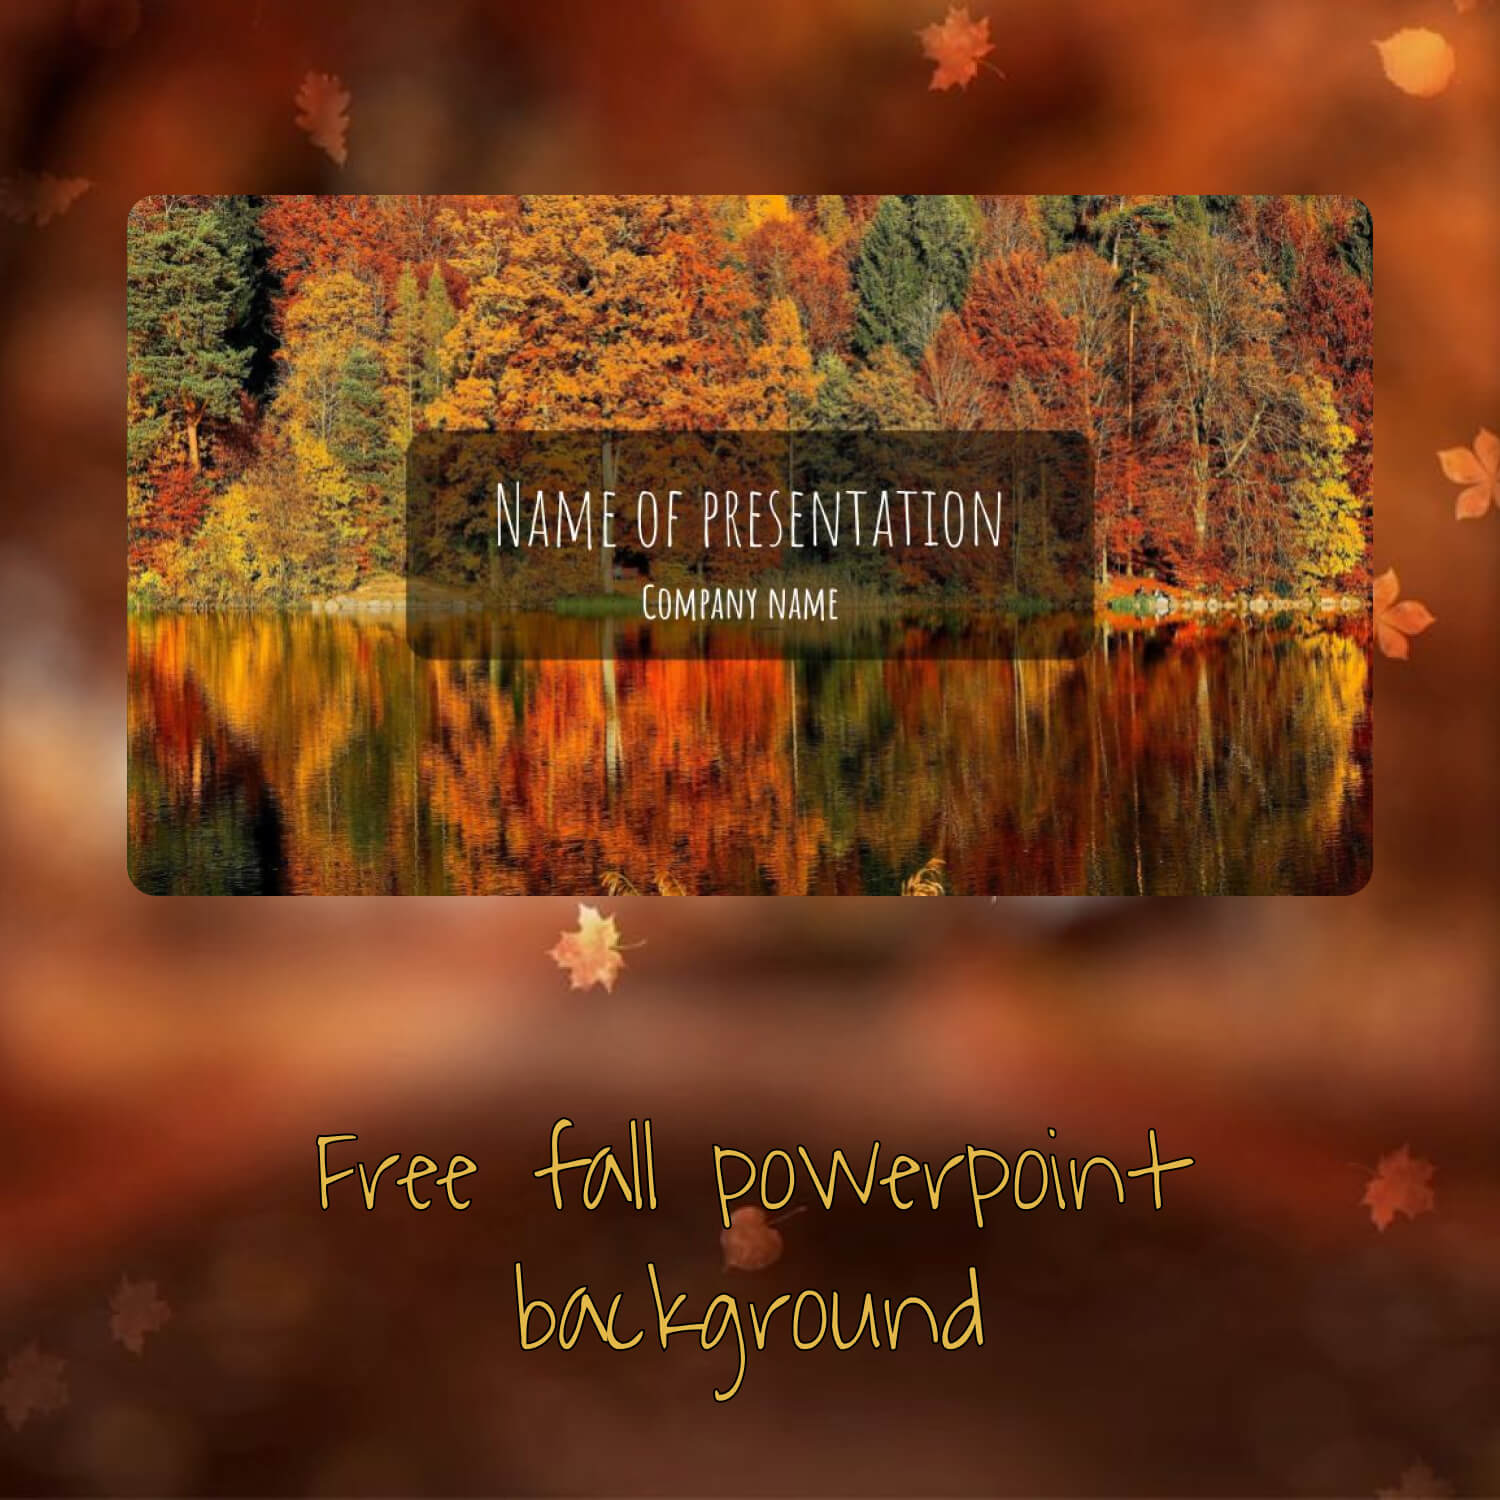 Free Fall Powerpoint Background.